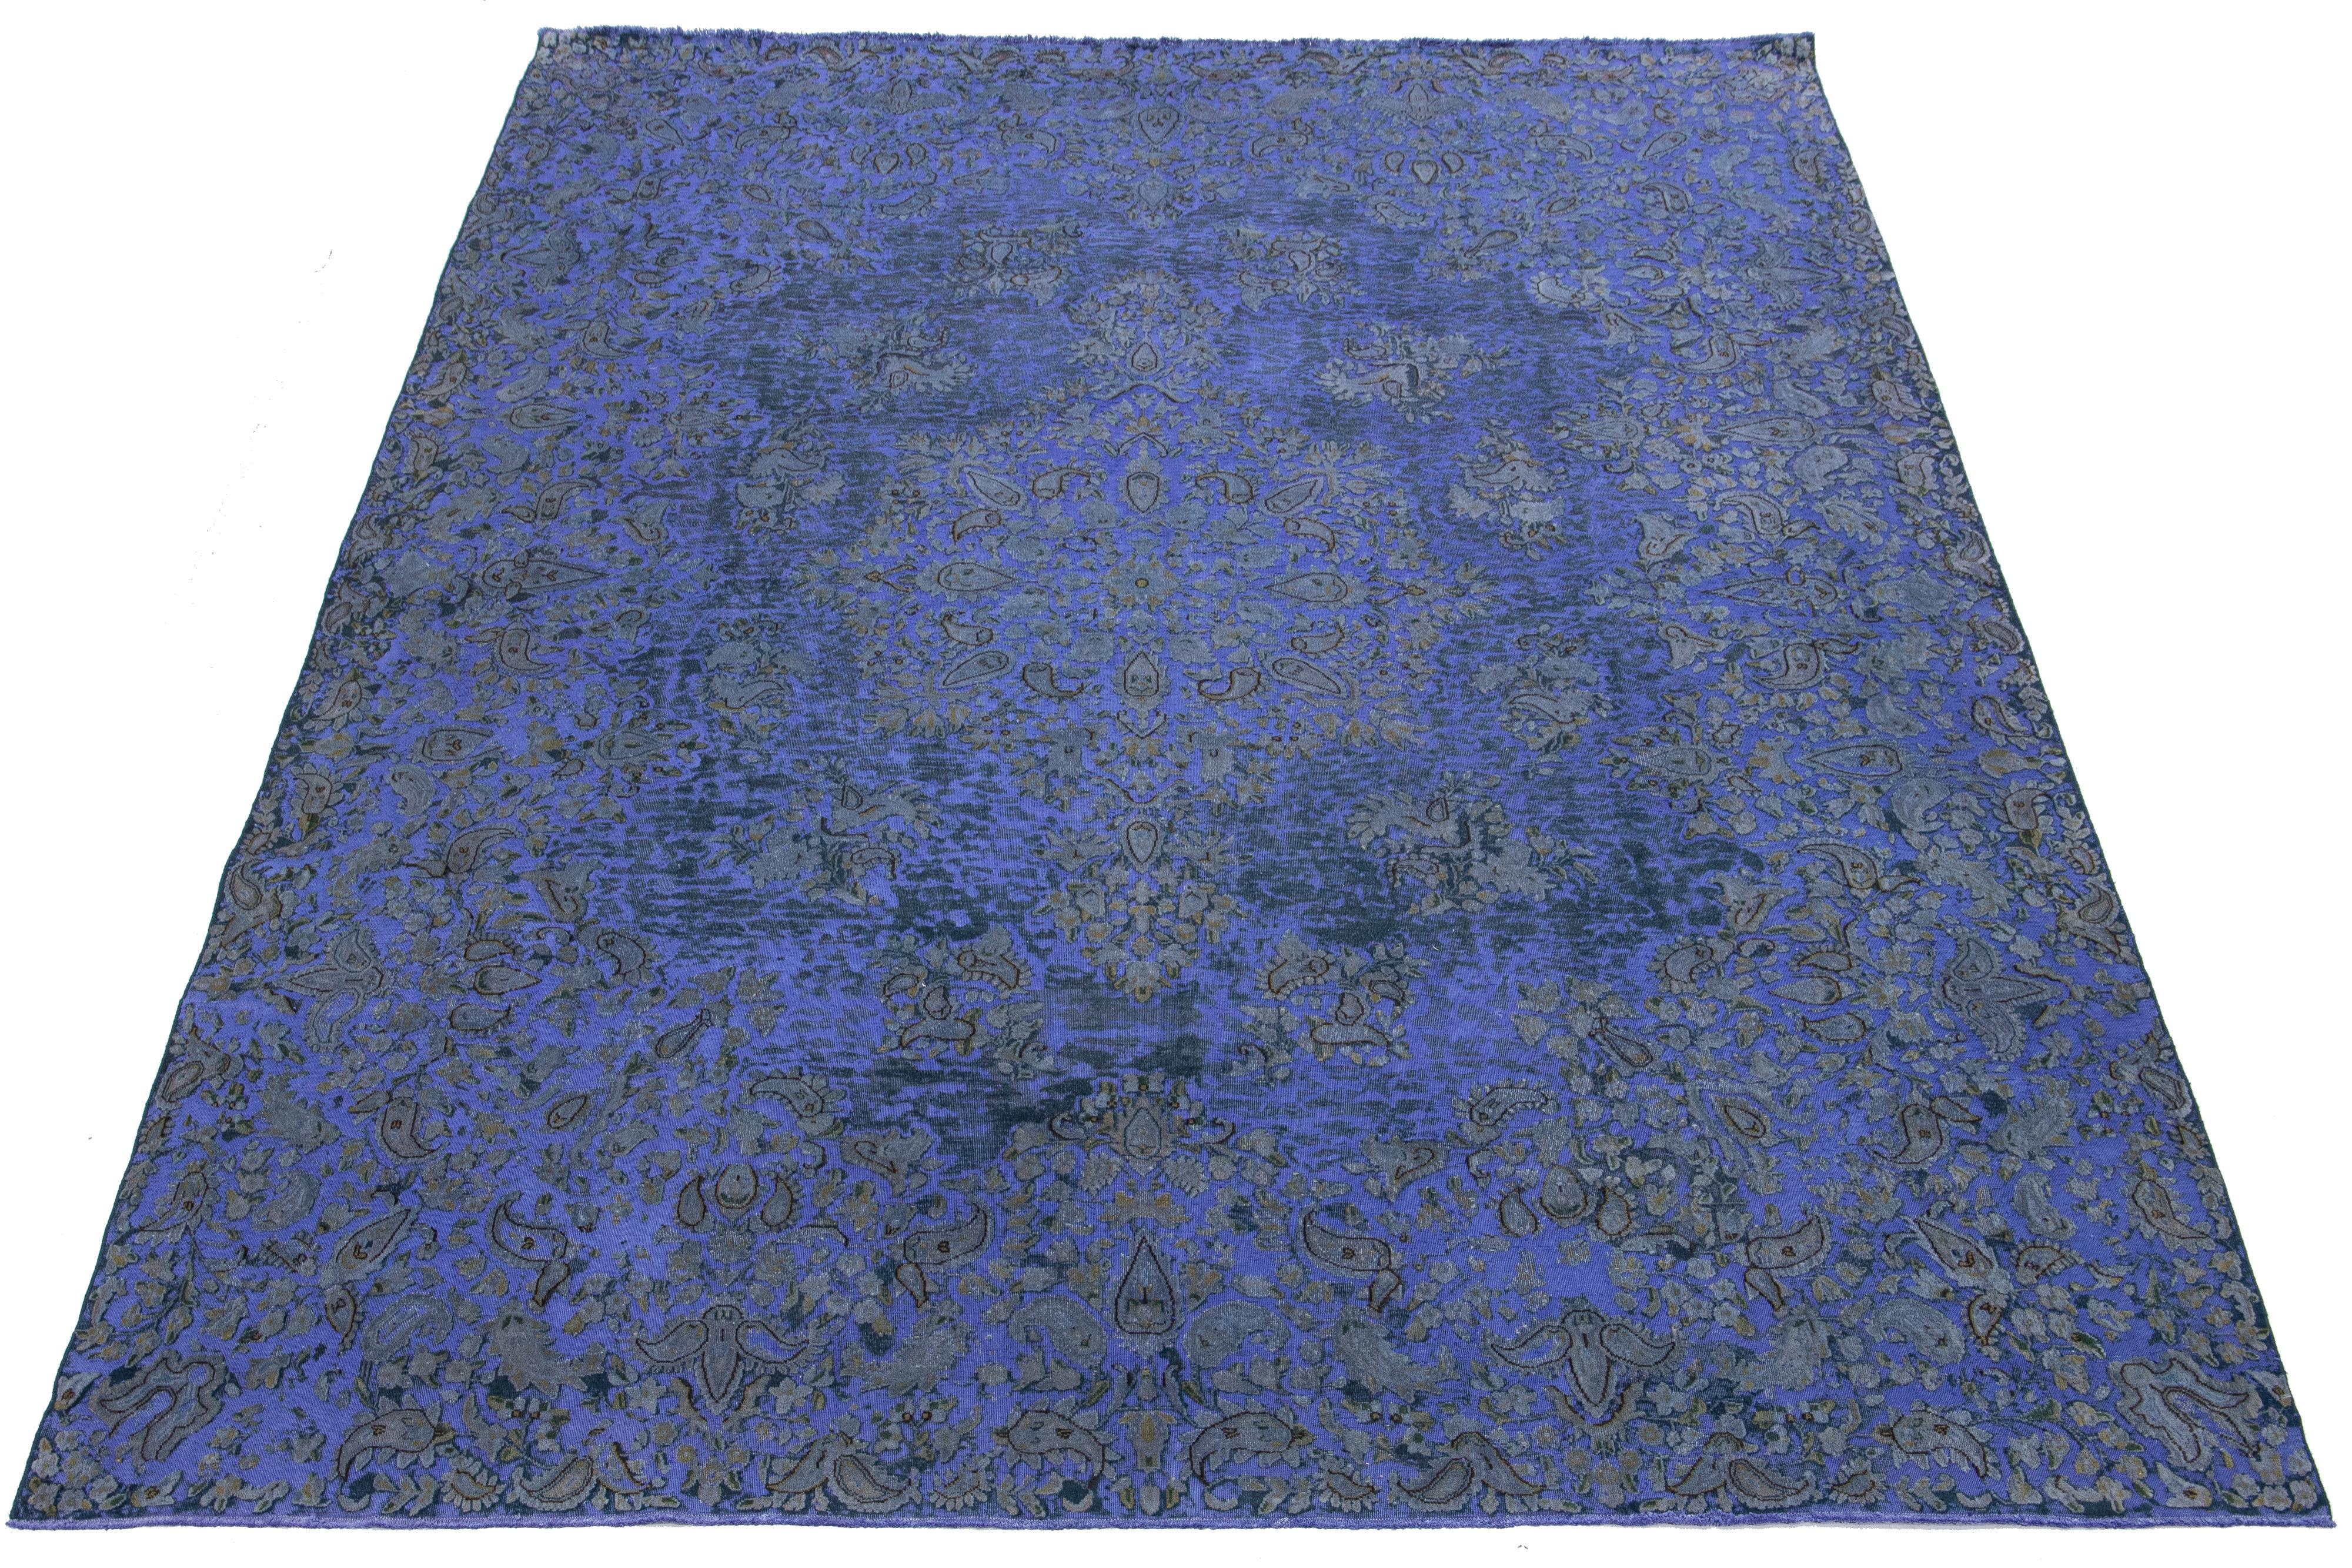 This antique Iris Purple Overdyed Persian wool rug features a rosette design with beige and gray accents.

This rug measures 9'8'' x 13'10